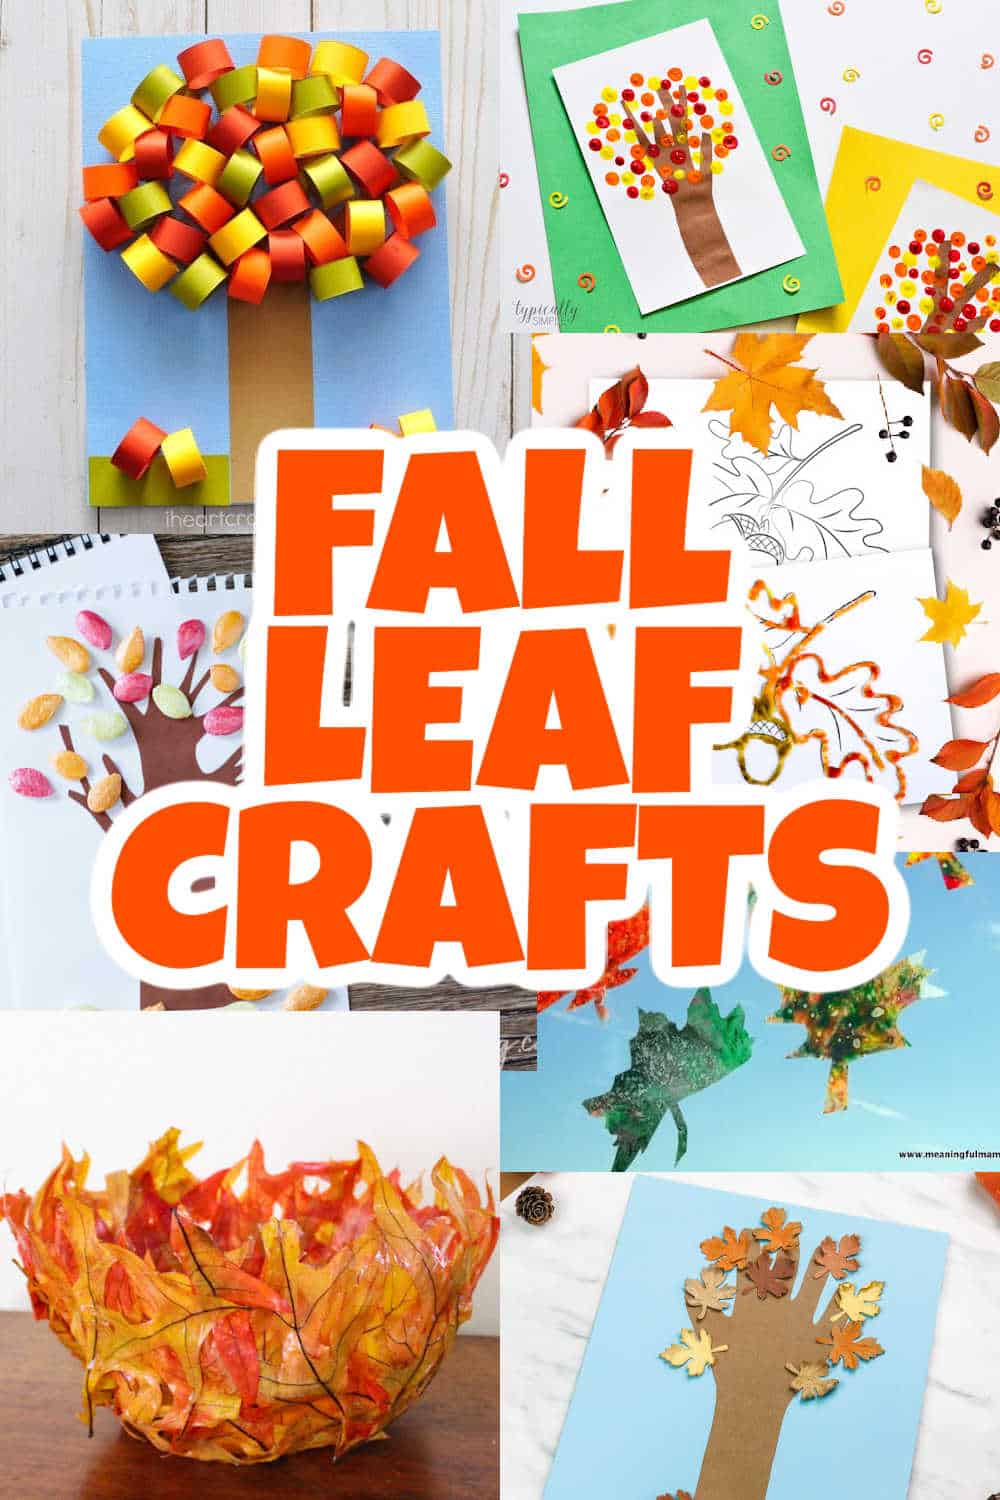 https://www.madewithhappy.com/wp-content/uploads/crafts-with-fall-leaves.jpg